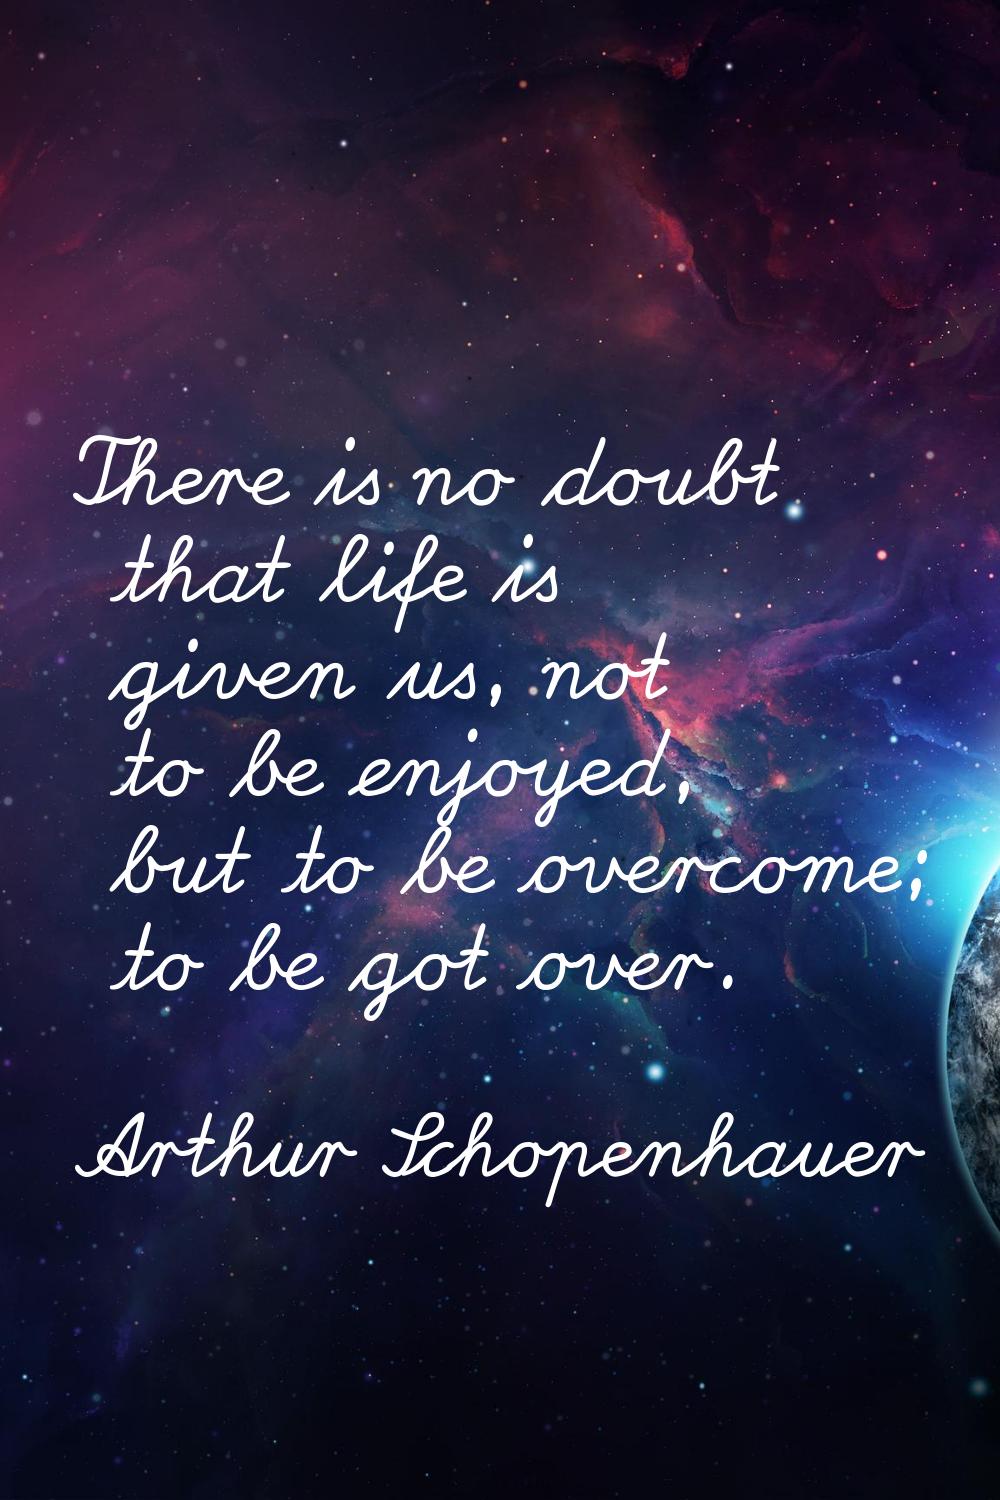 There is no doubt that life is given us, not to be enjoyed, but to be overcome; to be got over.